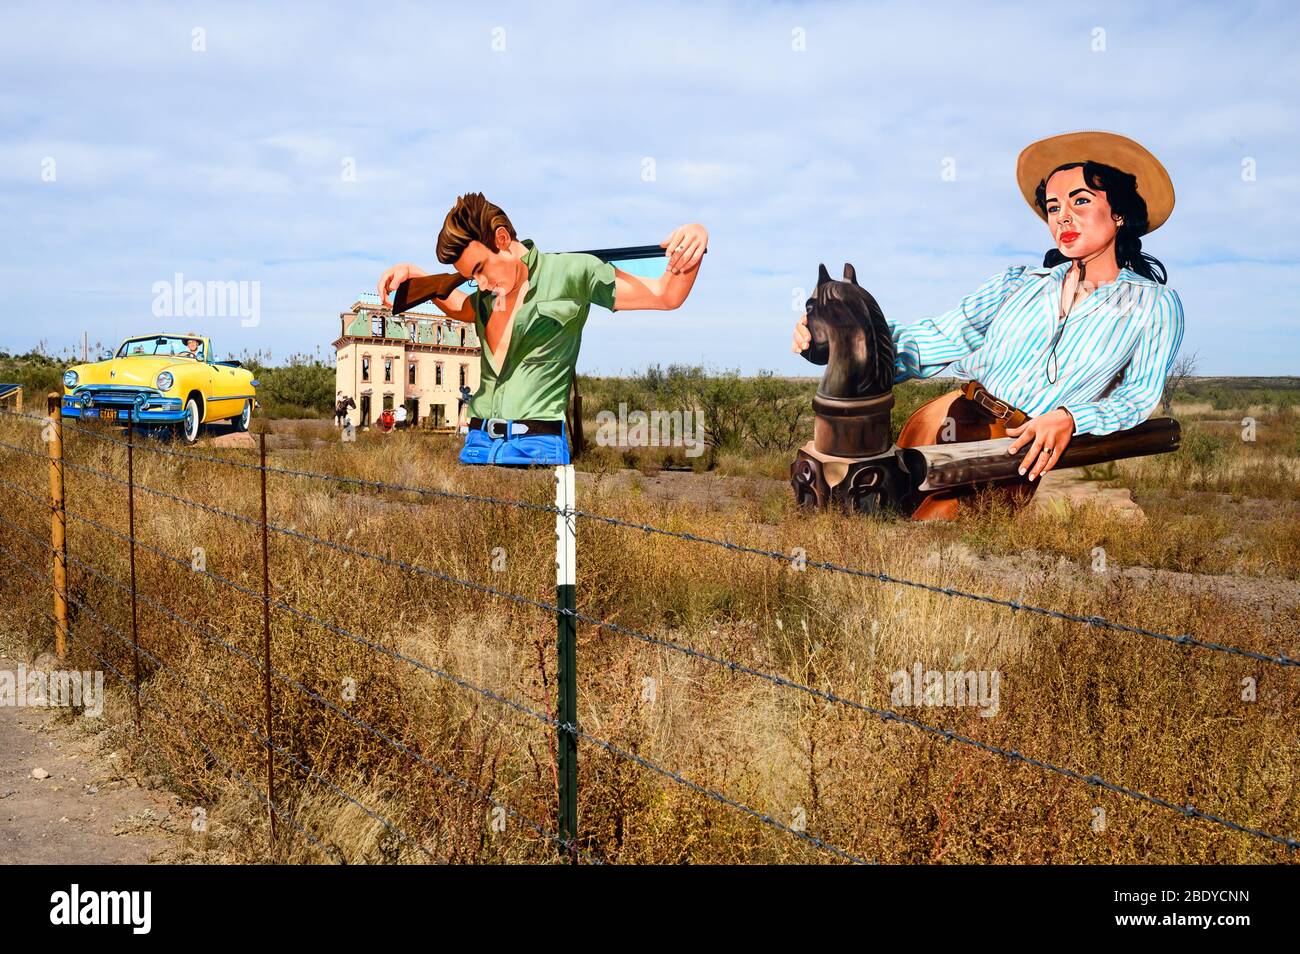 This roadside attraction near Marfa, Texas called Giant Marfa pays tribute to the 'Giant' movie, starring James Dean and Liz Taylor. Stock Photo